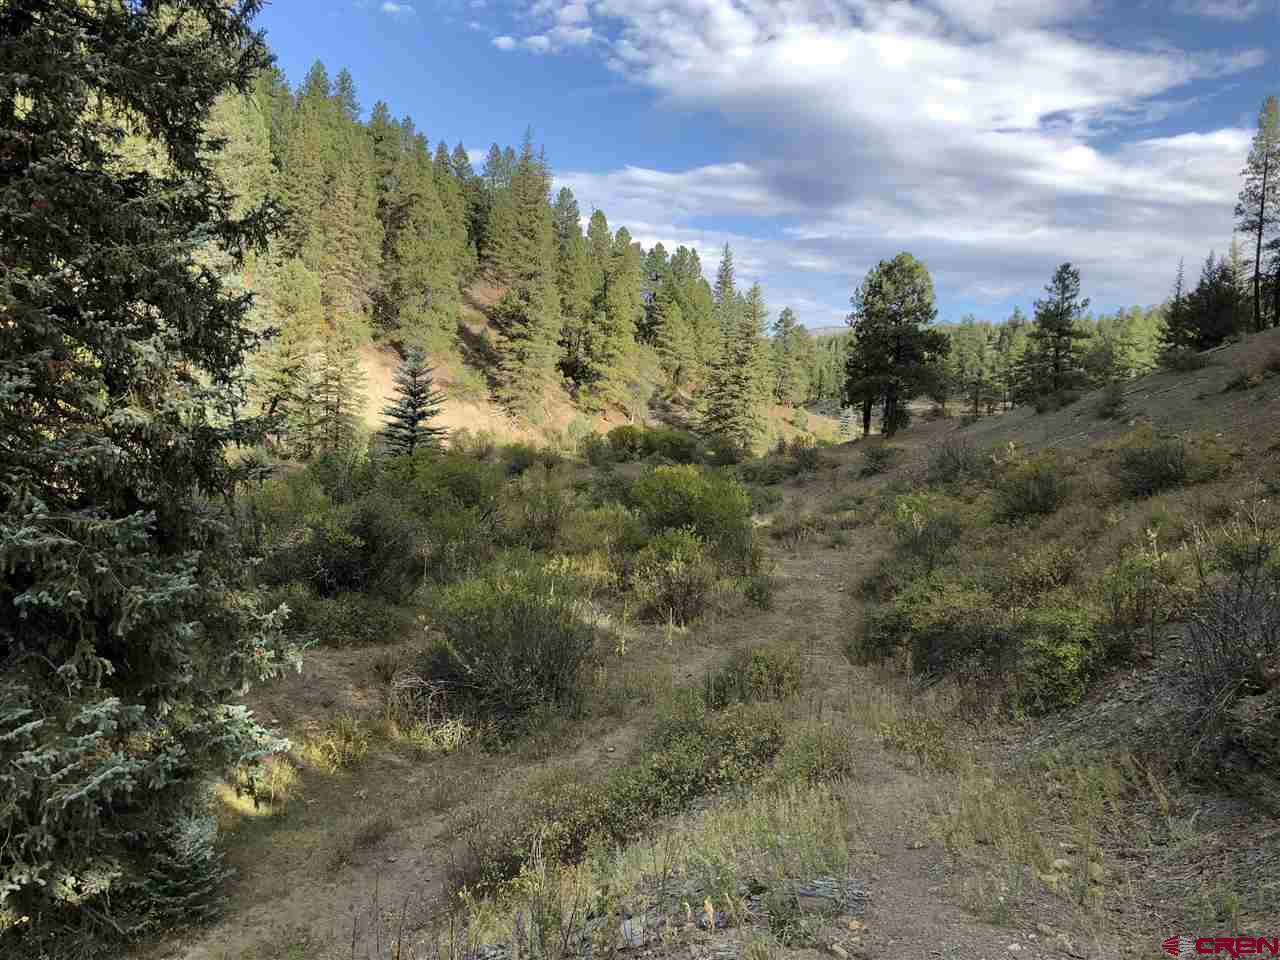 x Hidden Valley Dr. Pagosa Springs CO 81147 For Sale